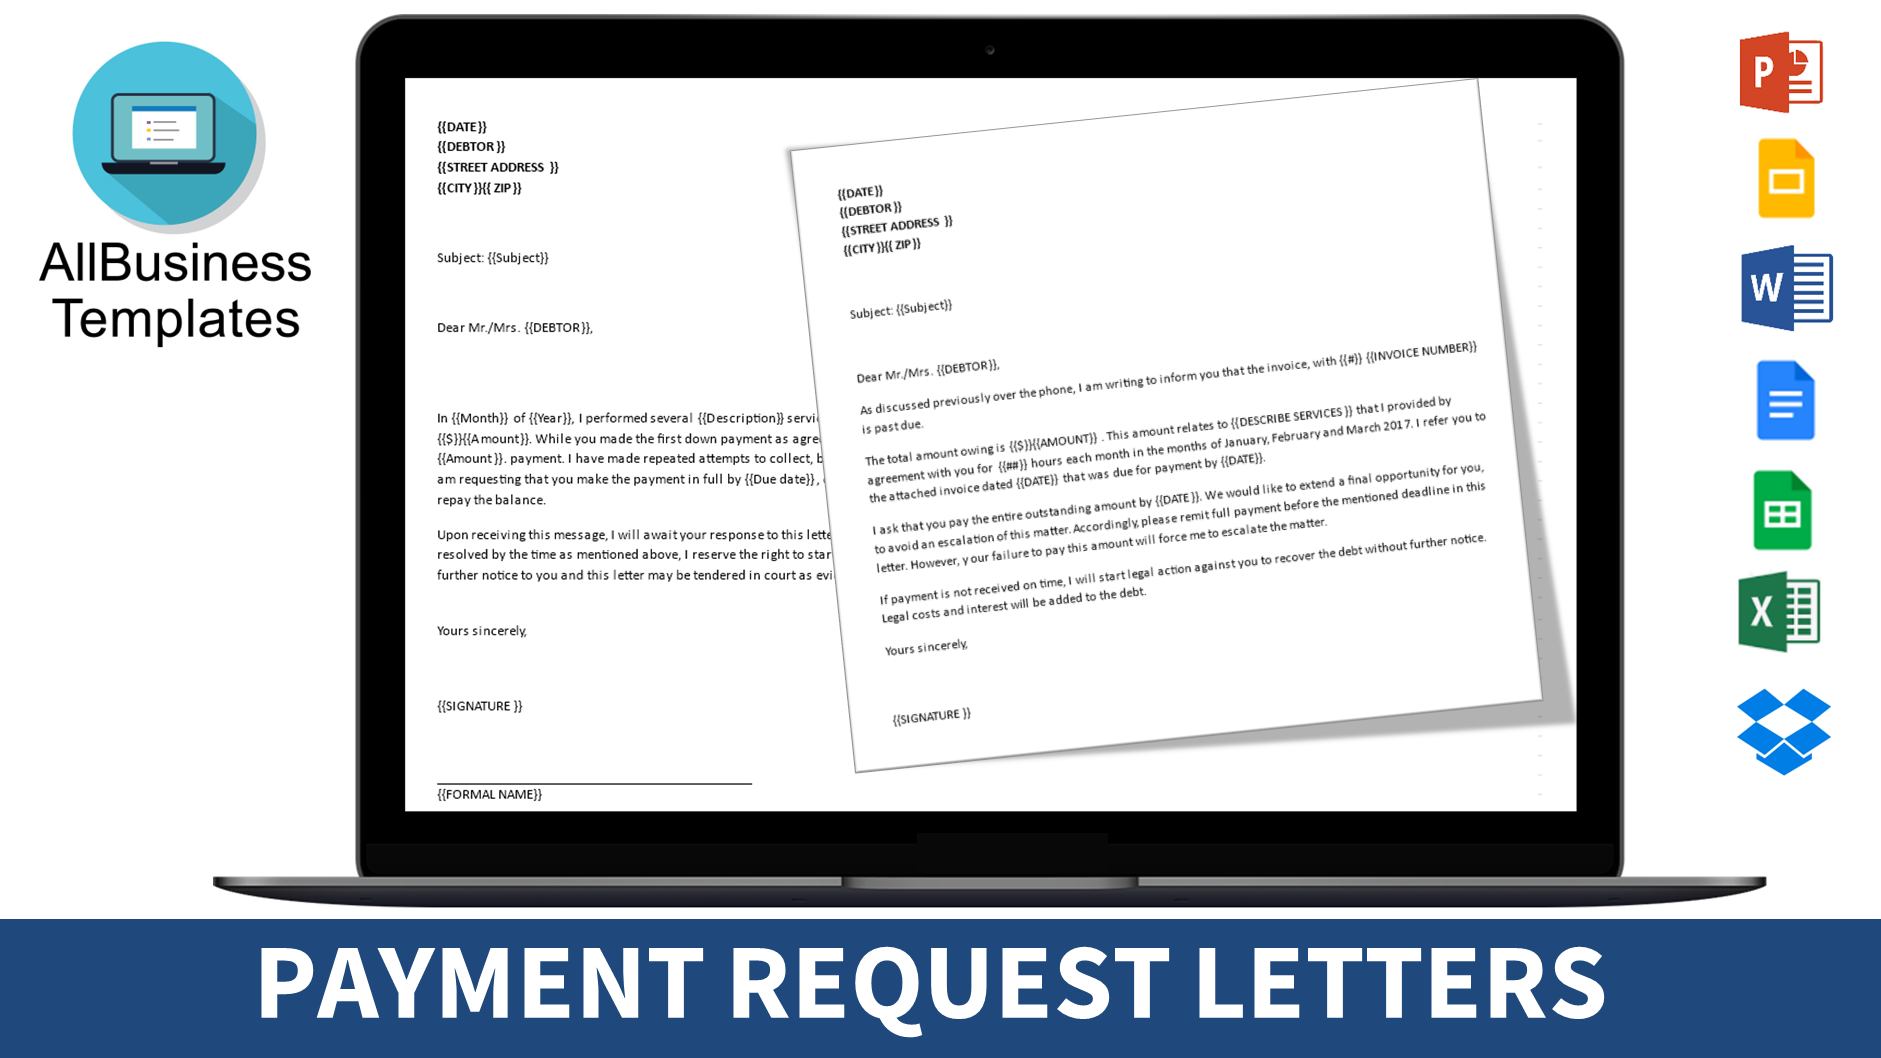 Payment request letter main image